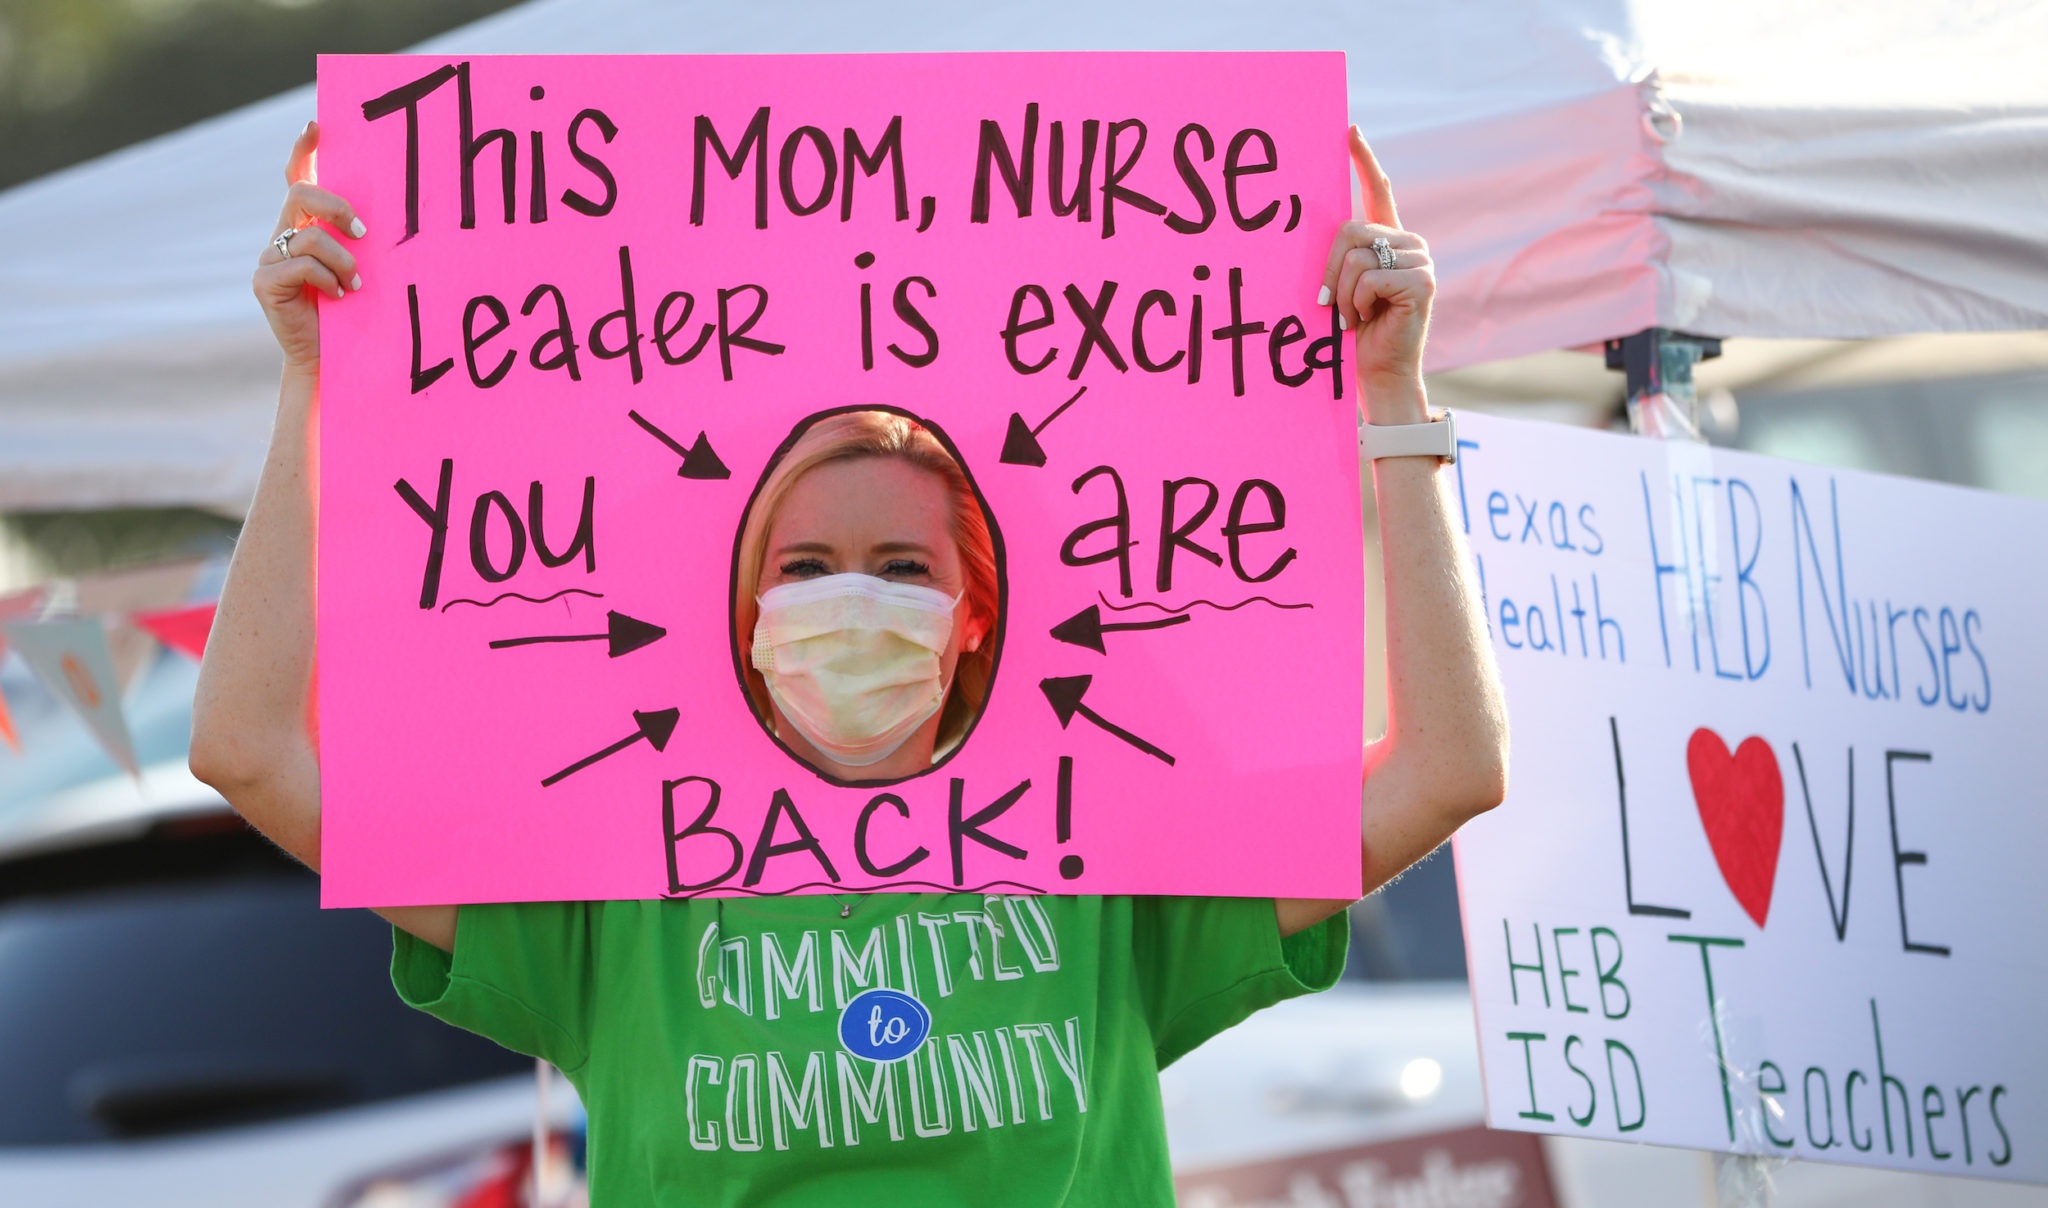 A woman in a mask holds up a pink sign that reads "This mom, nurse, leader is excited you are back!"